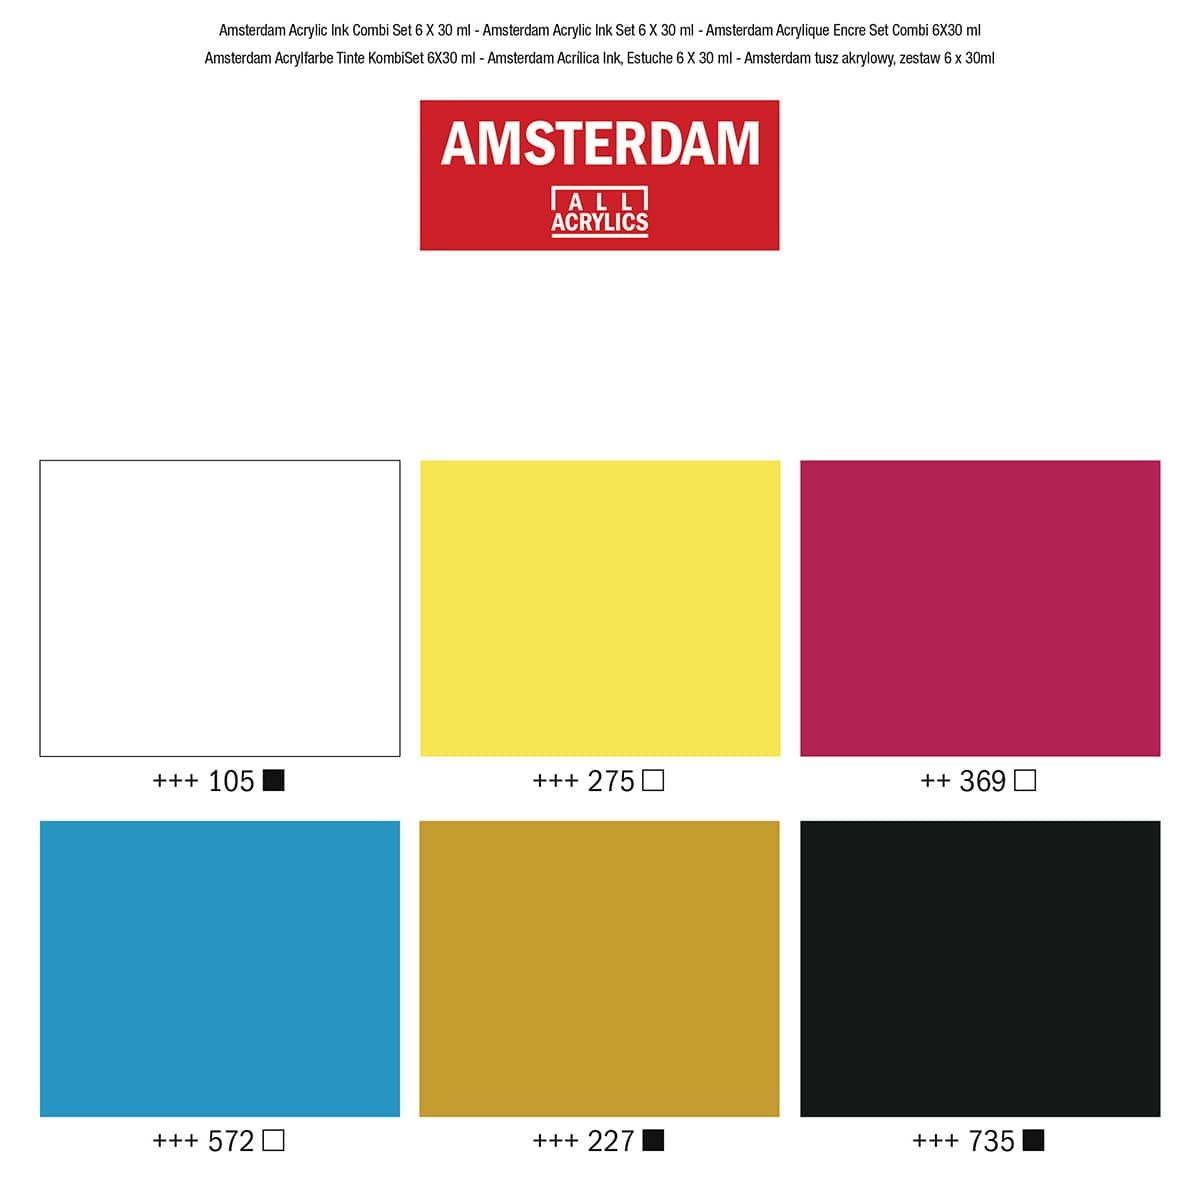 Amsterdam Acrylic Ink Set of 6 - Assorted Colors, 30ml